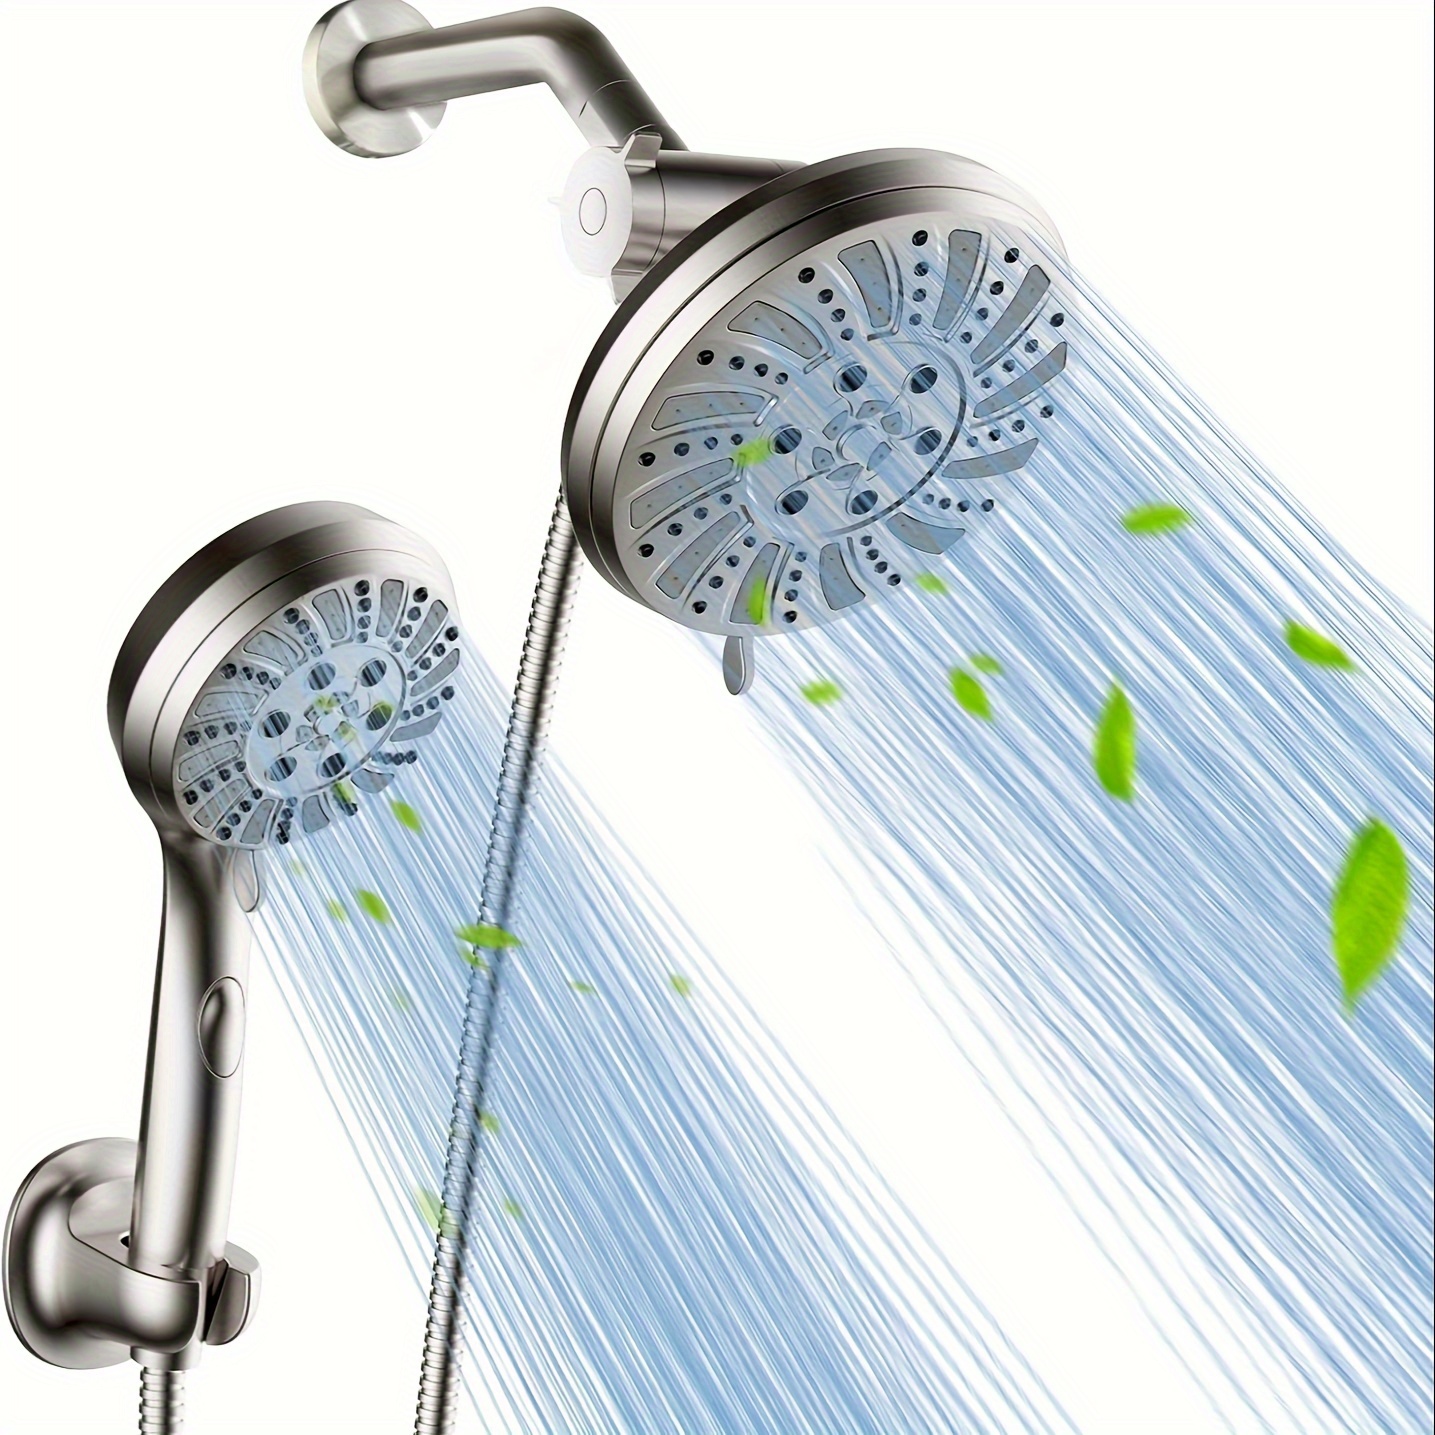 

Shower Heads With Handheld Spray Combo: 6-setting Showerhead With Handheld And 5-setting Rainfall Spray, High Pressure Sprayer With 70" Stainless Long Hose, Brushed Nickel